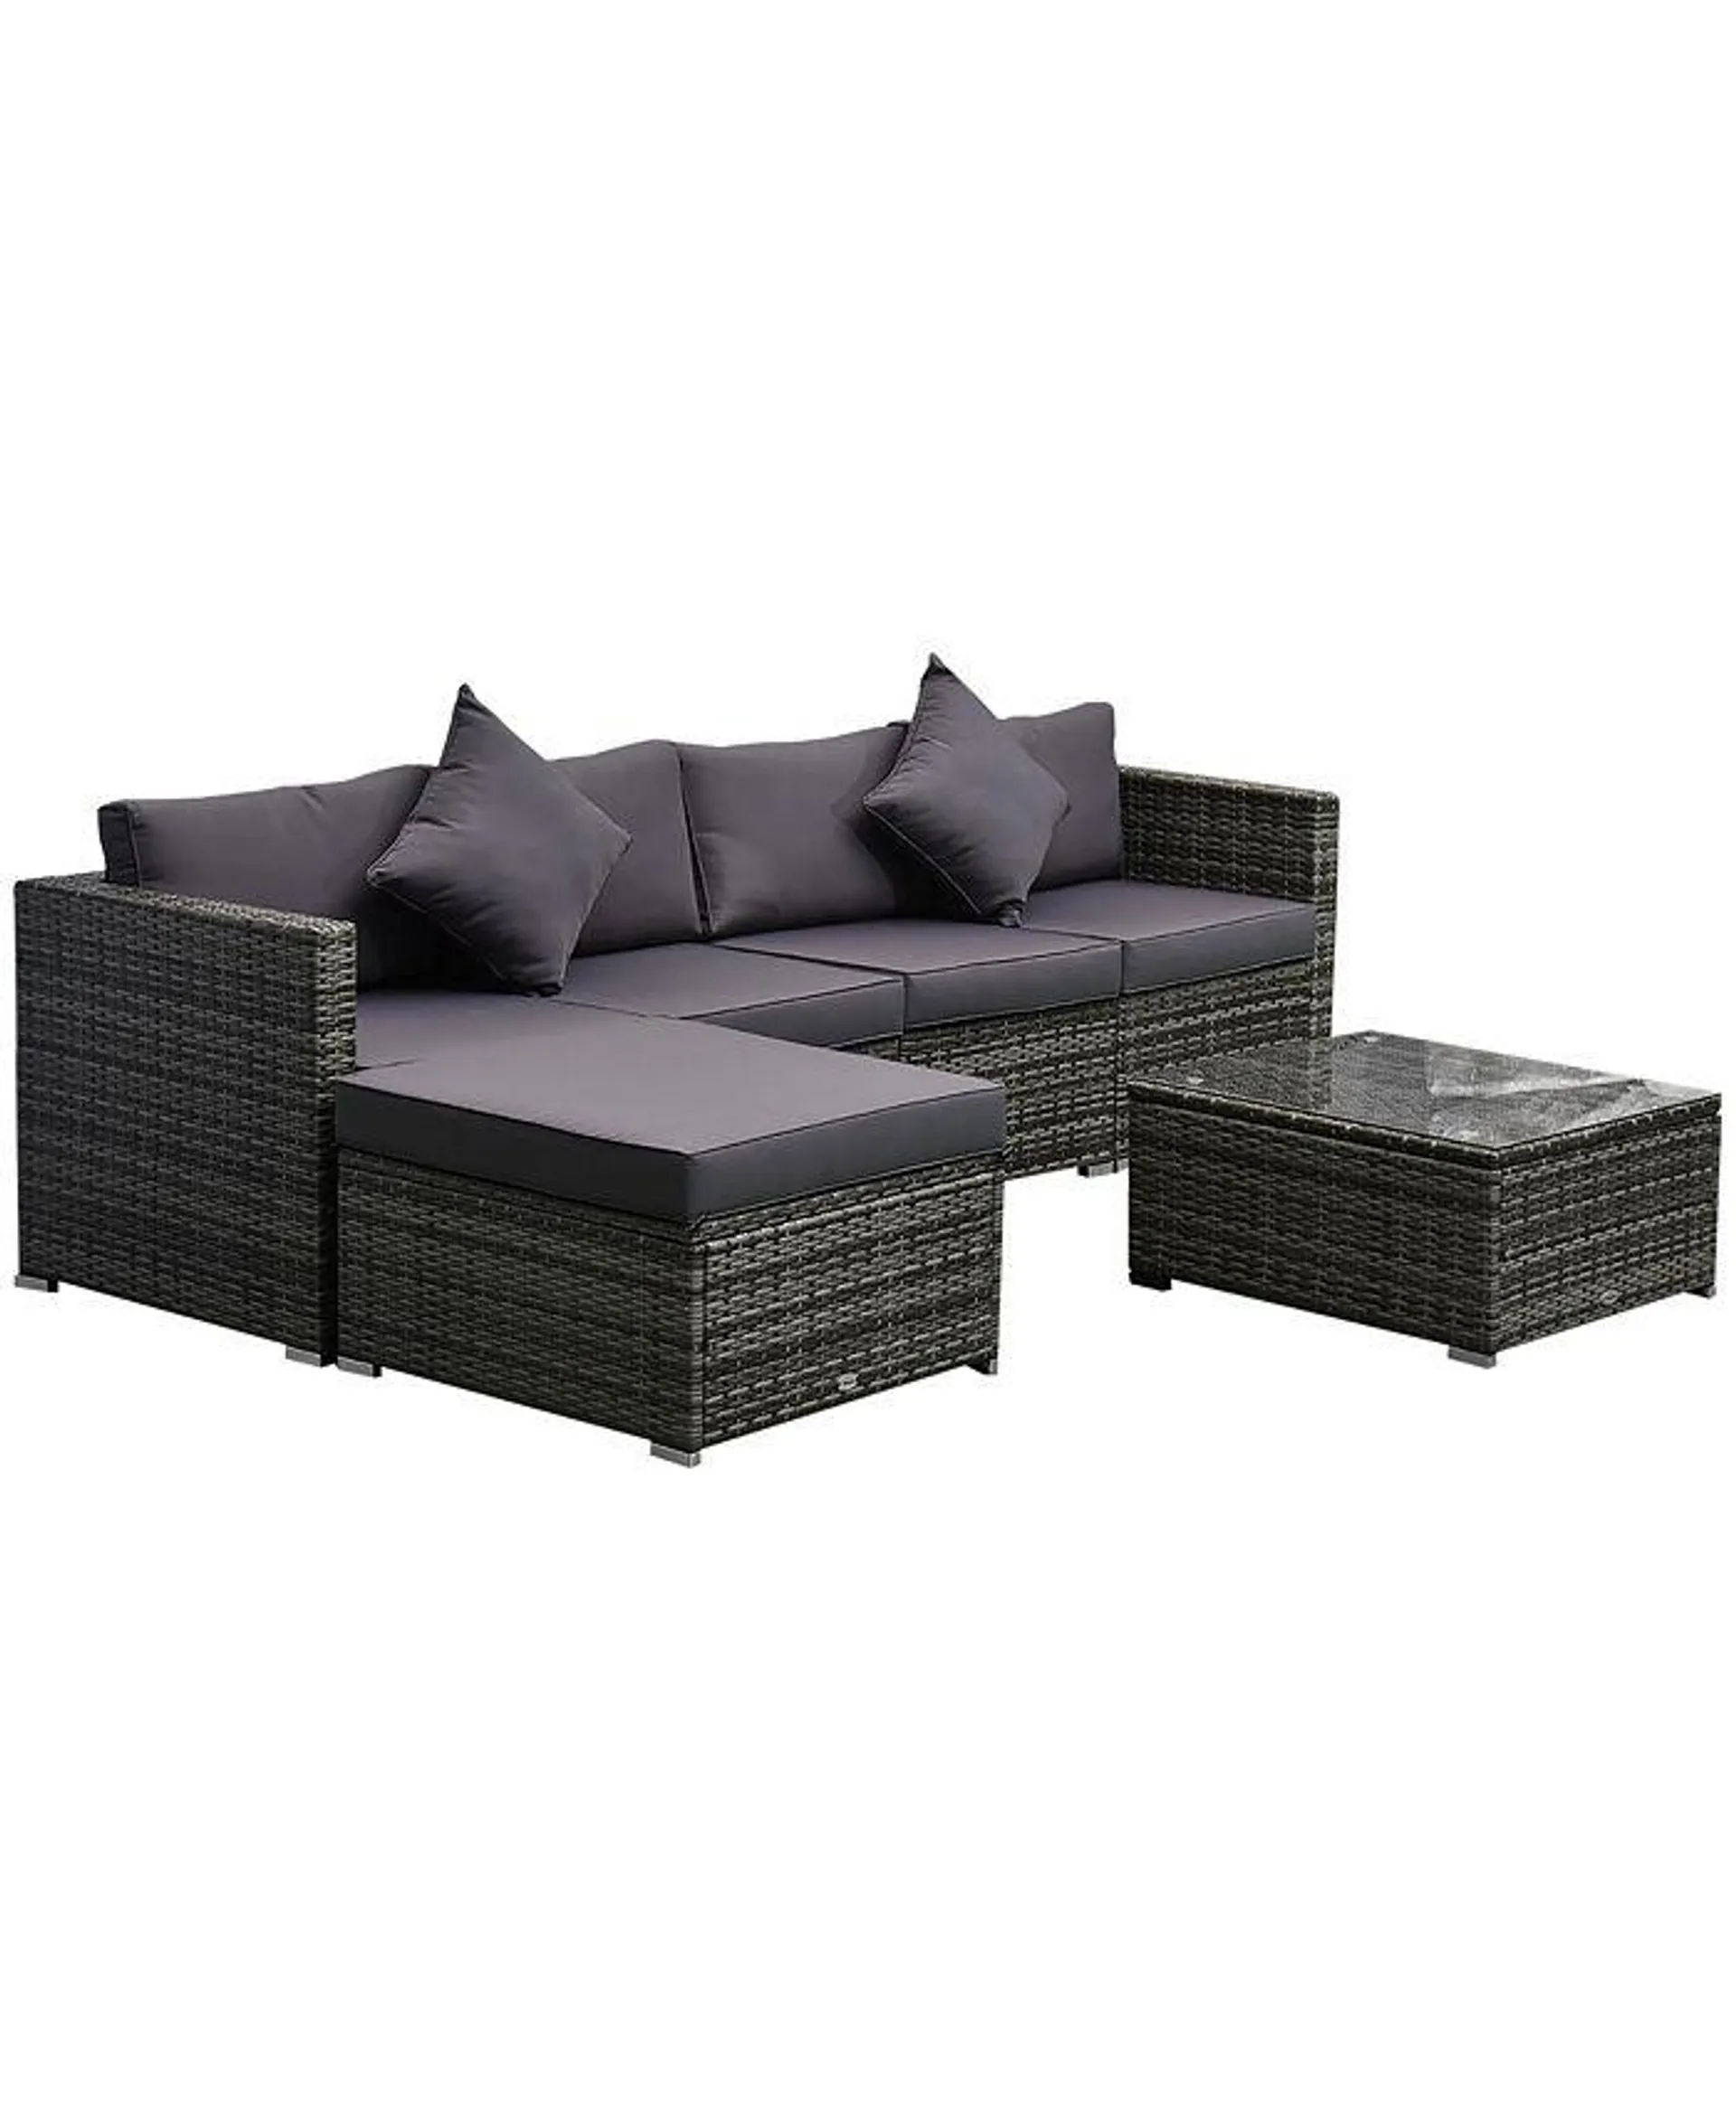 6 Pieces Patio Furniture Sets Outdoor Wicker Conversation Sets All Weather PE Rattan Sectional sofa set with Ottoman, Cushions & Tempered Glass Desktop, Grey